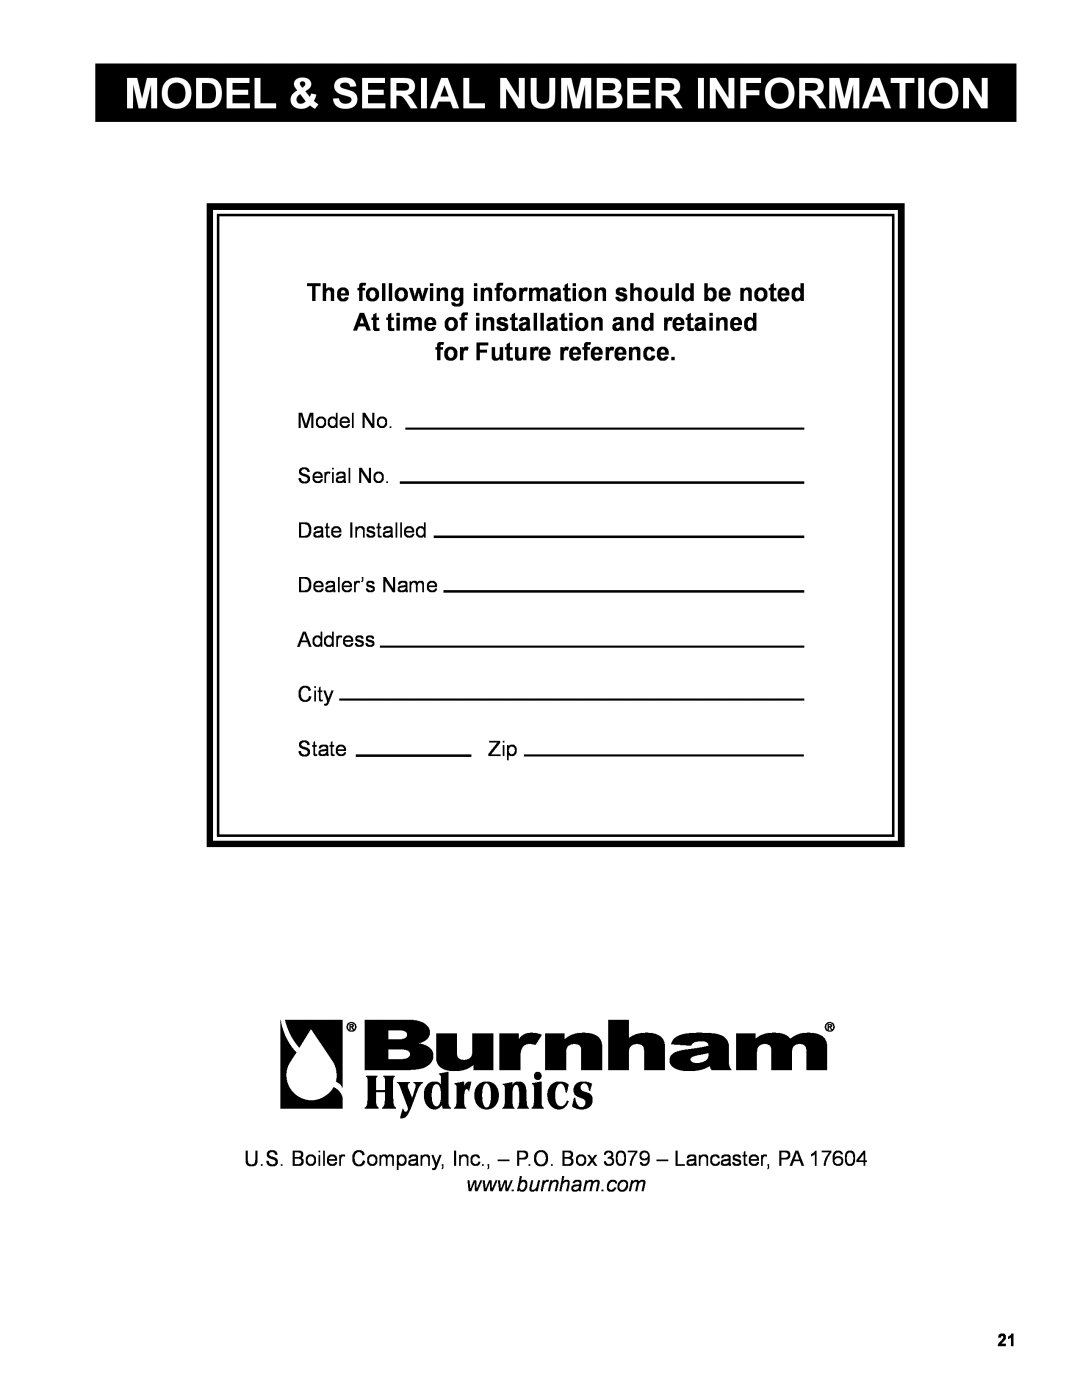 Burnham AL SL warranty Model & Serial Number Information, The following information should be noted, for Future reference 